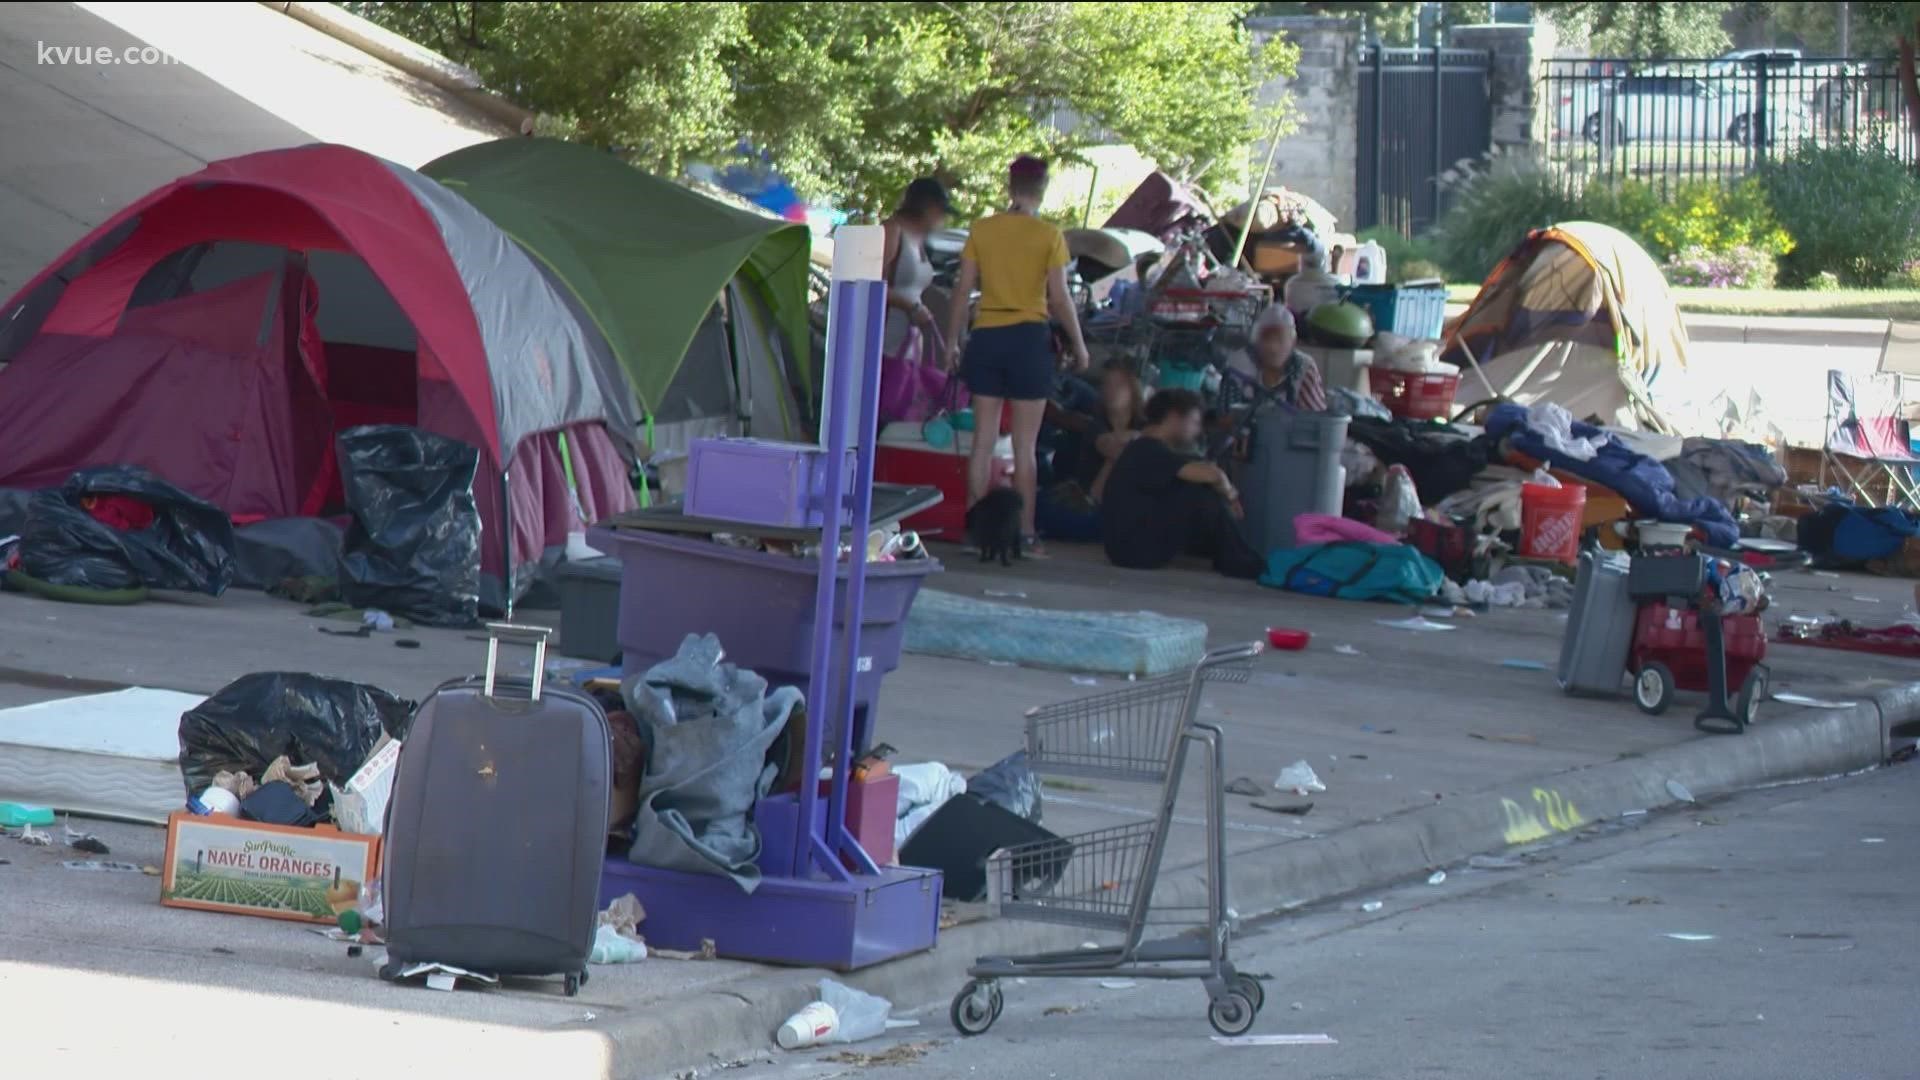 City leaders said 23 people who were camping under U.S. 183 at Oak Knoll Boulevard have been moved into a temporary shelter.